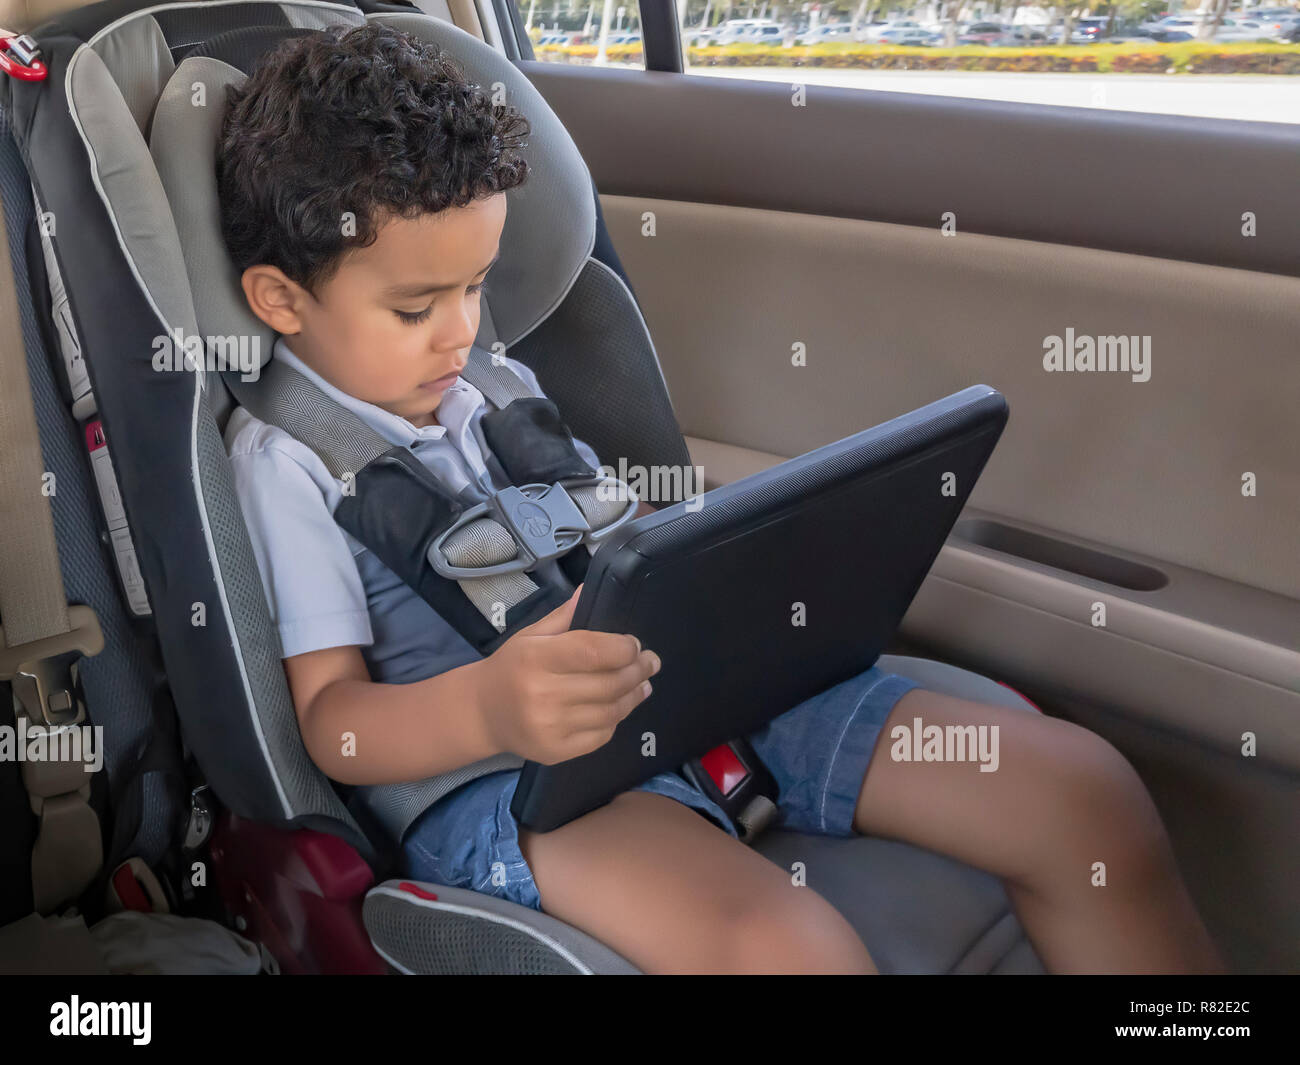 A little boy sits in the car seat playing with a tablet. Focused looking at the tablet pad unaware that he is strapped in the car seat moving. Stock Photo